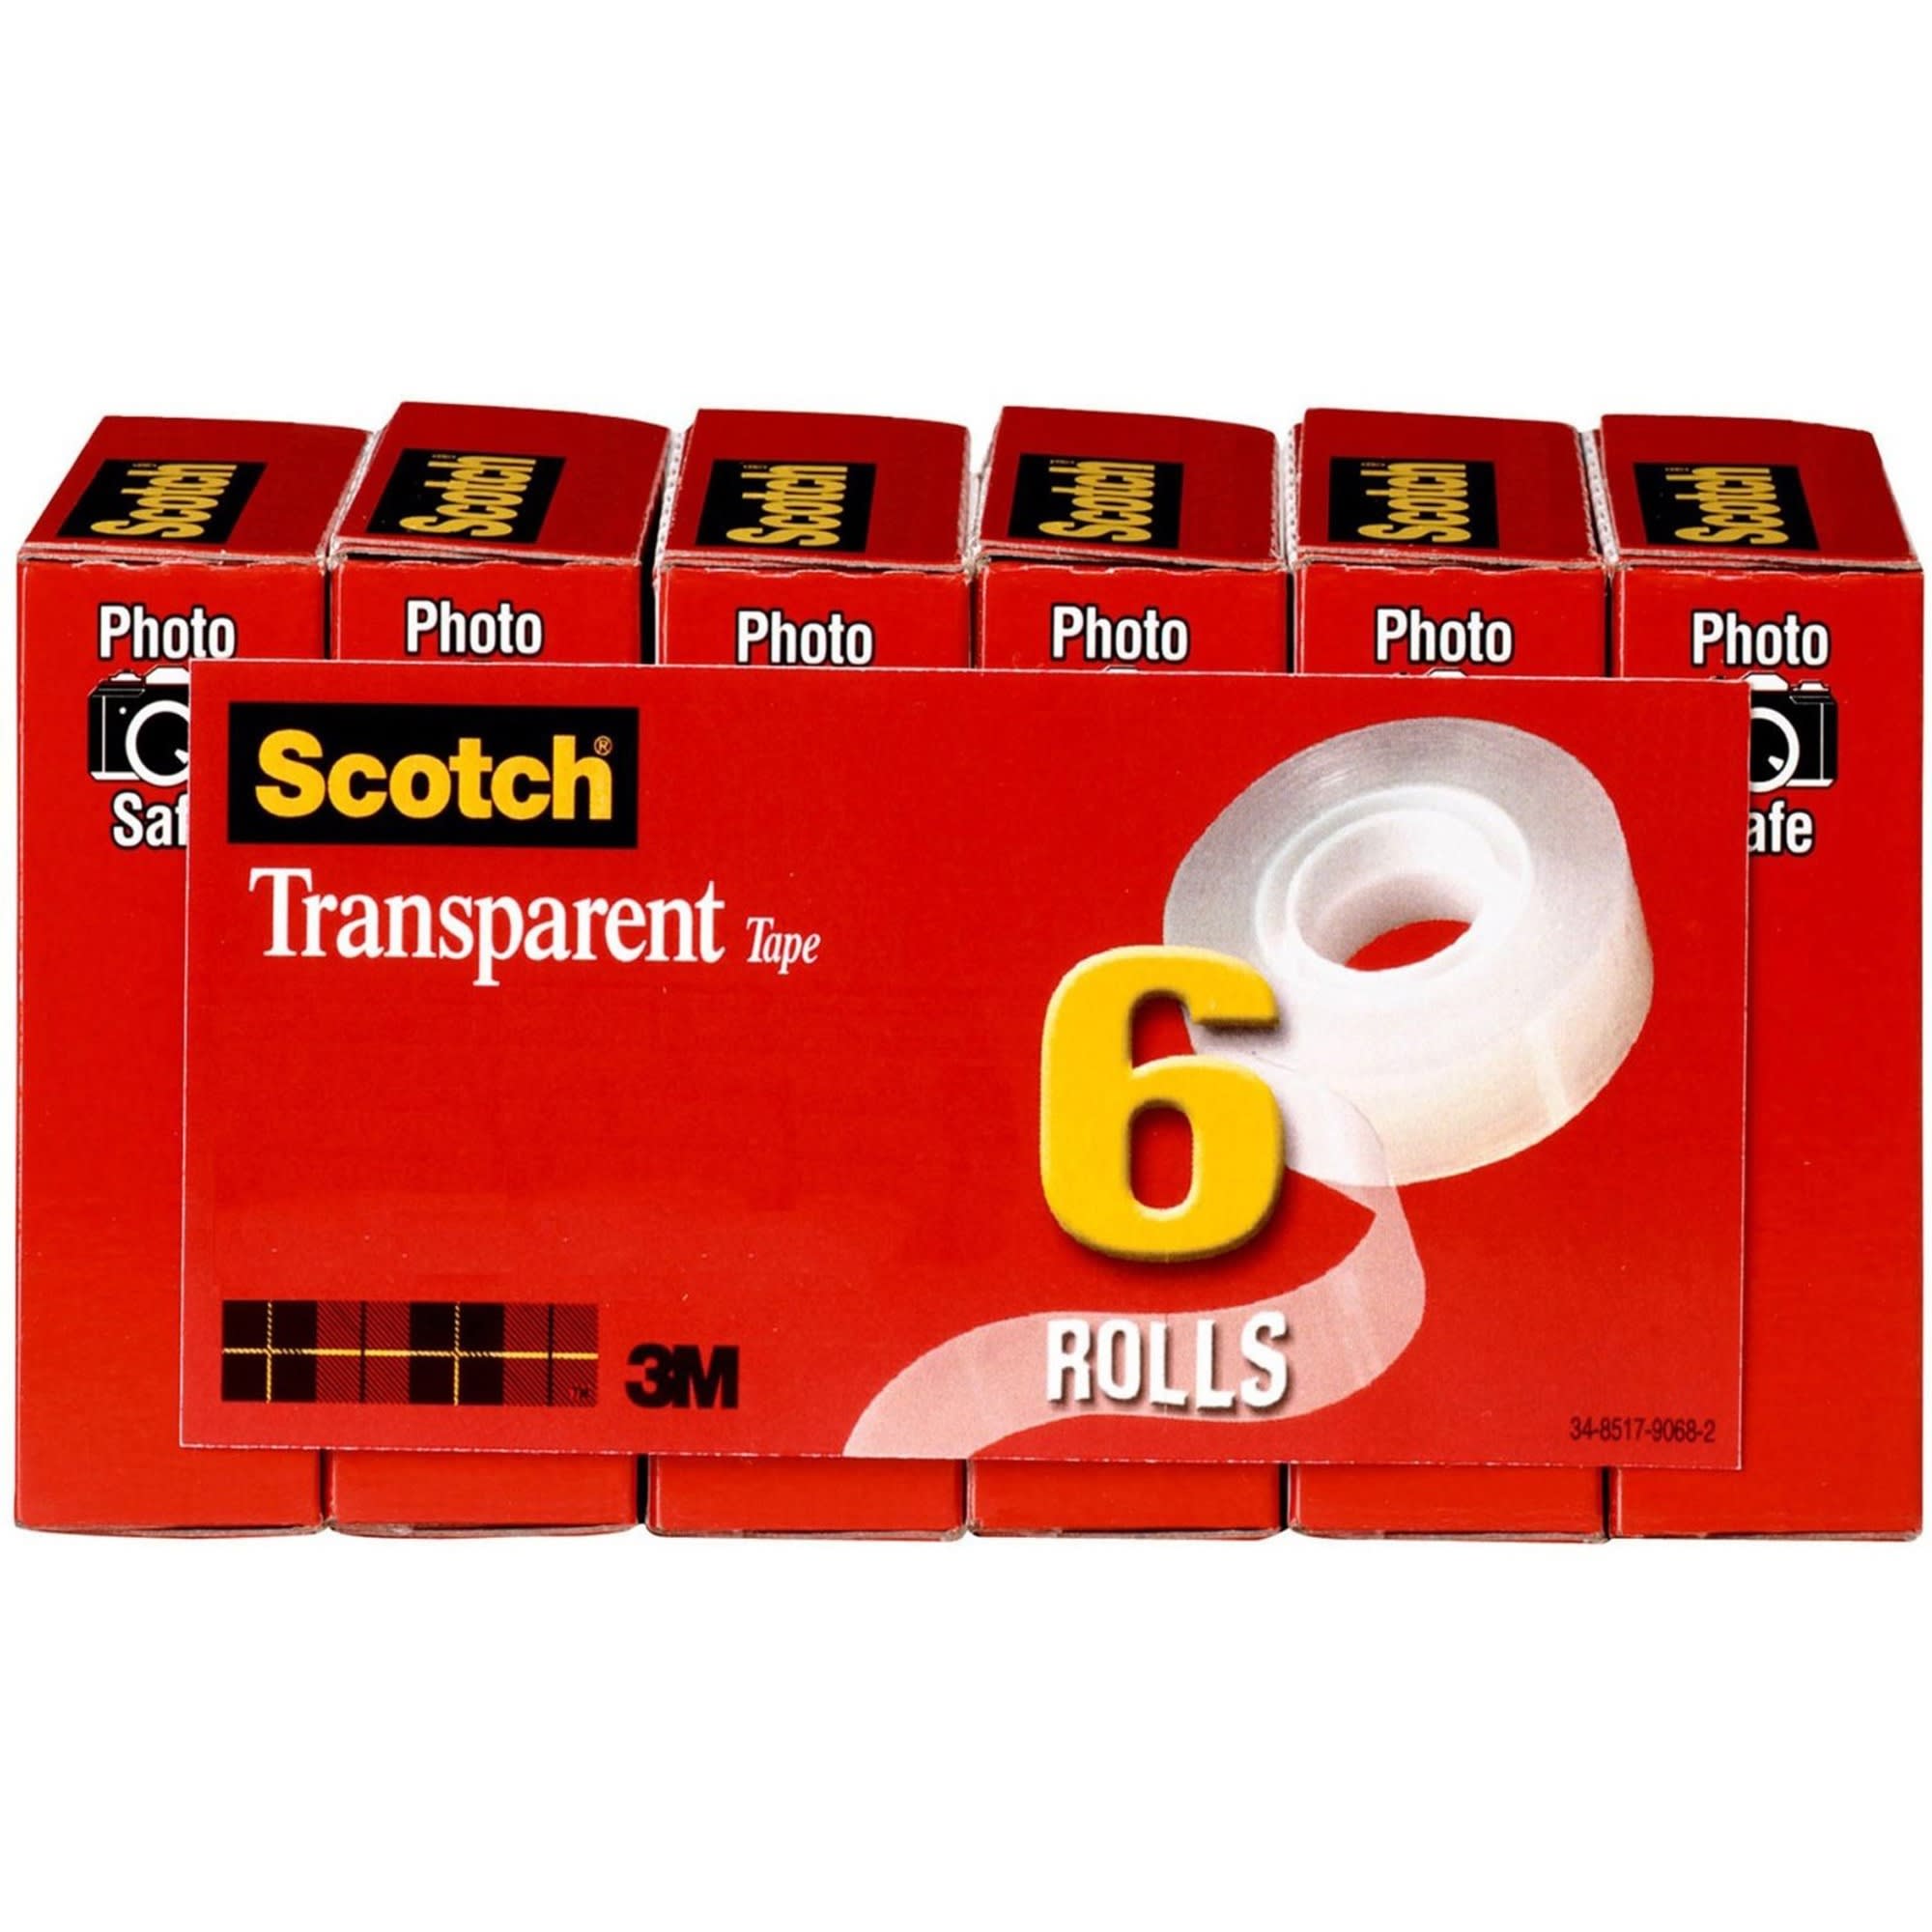 Scotch Colored Duct Tape 1 78 x 10 Yd. Hearts - Office Depot